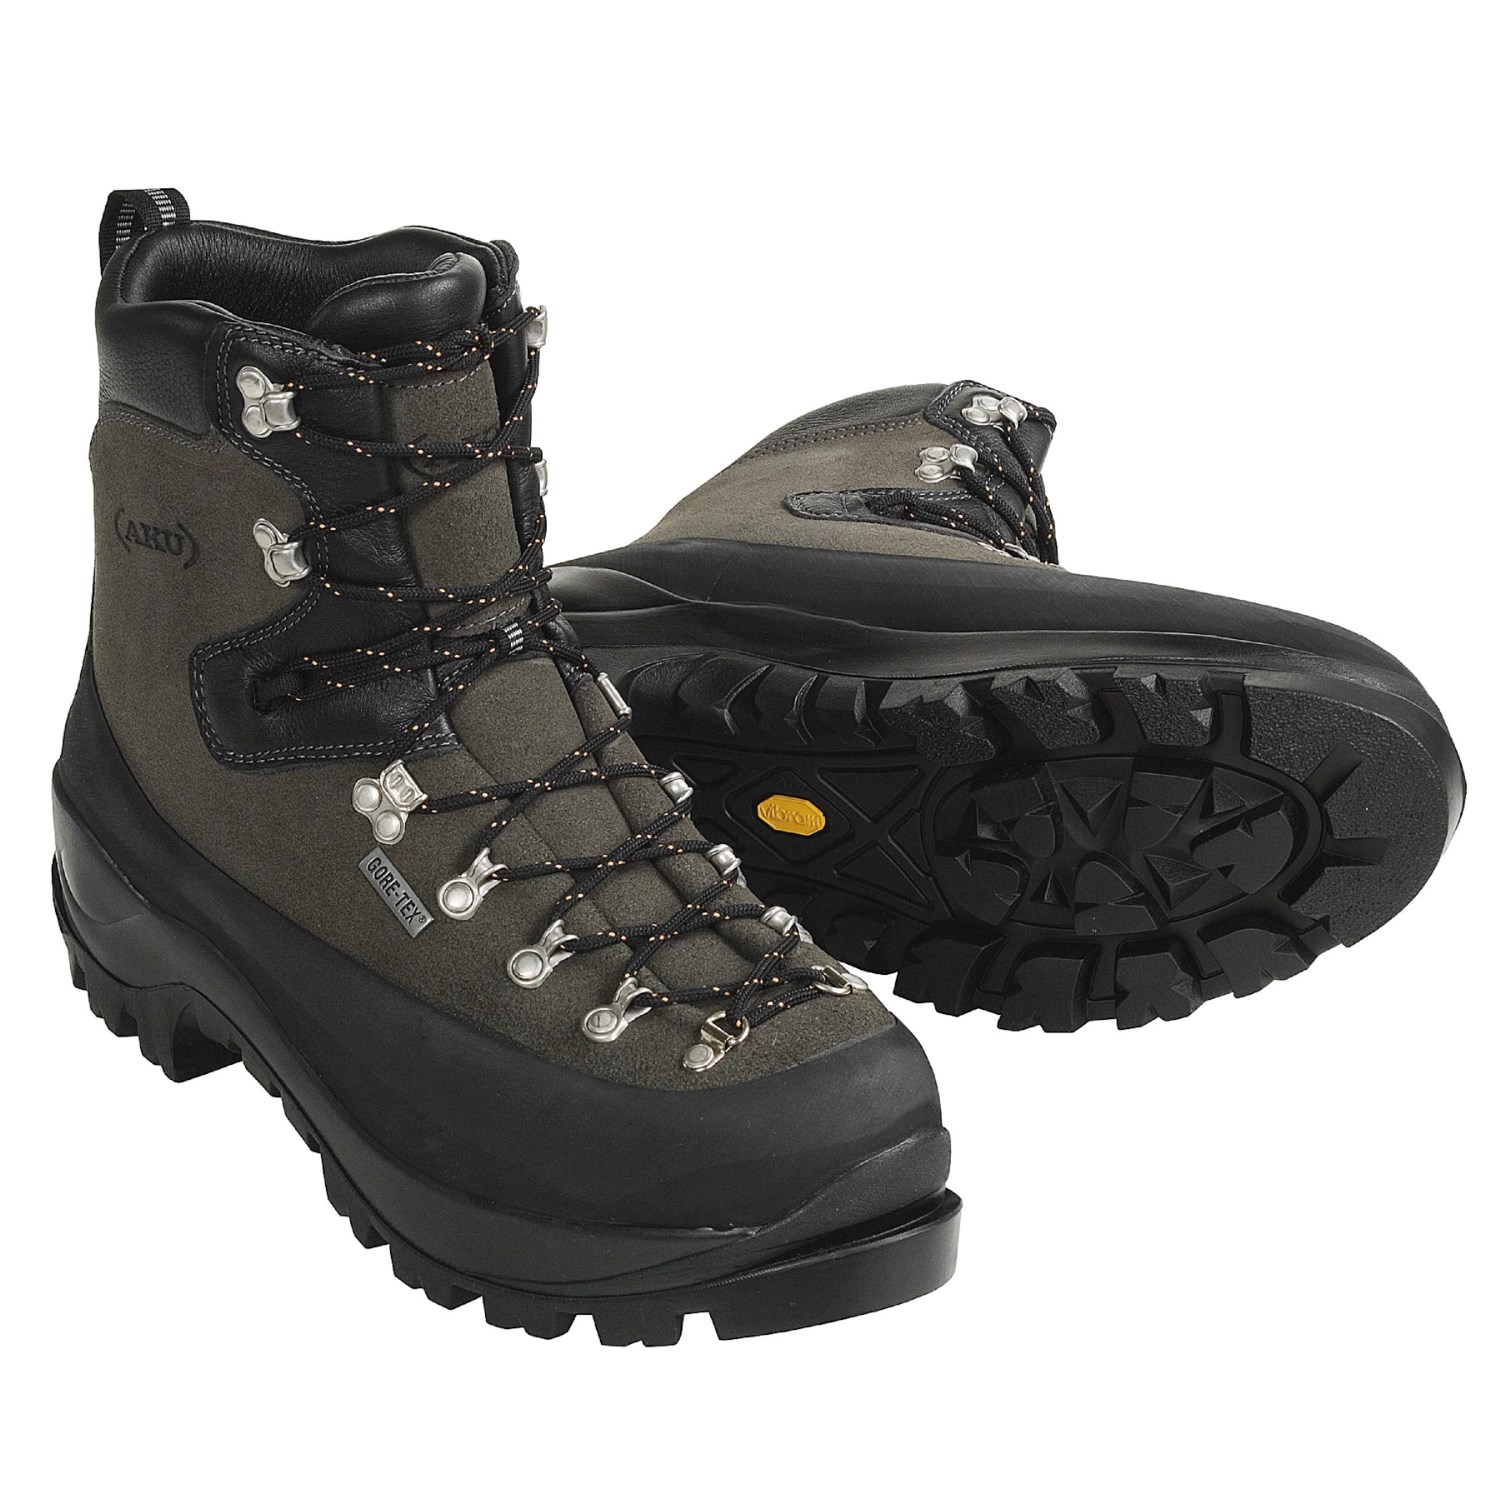 AKU-USA Mach Mountaineering Hiking Boots (For Men) 1452A - Save 40%